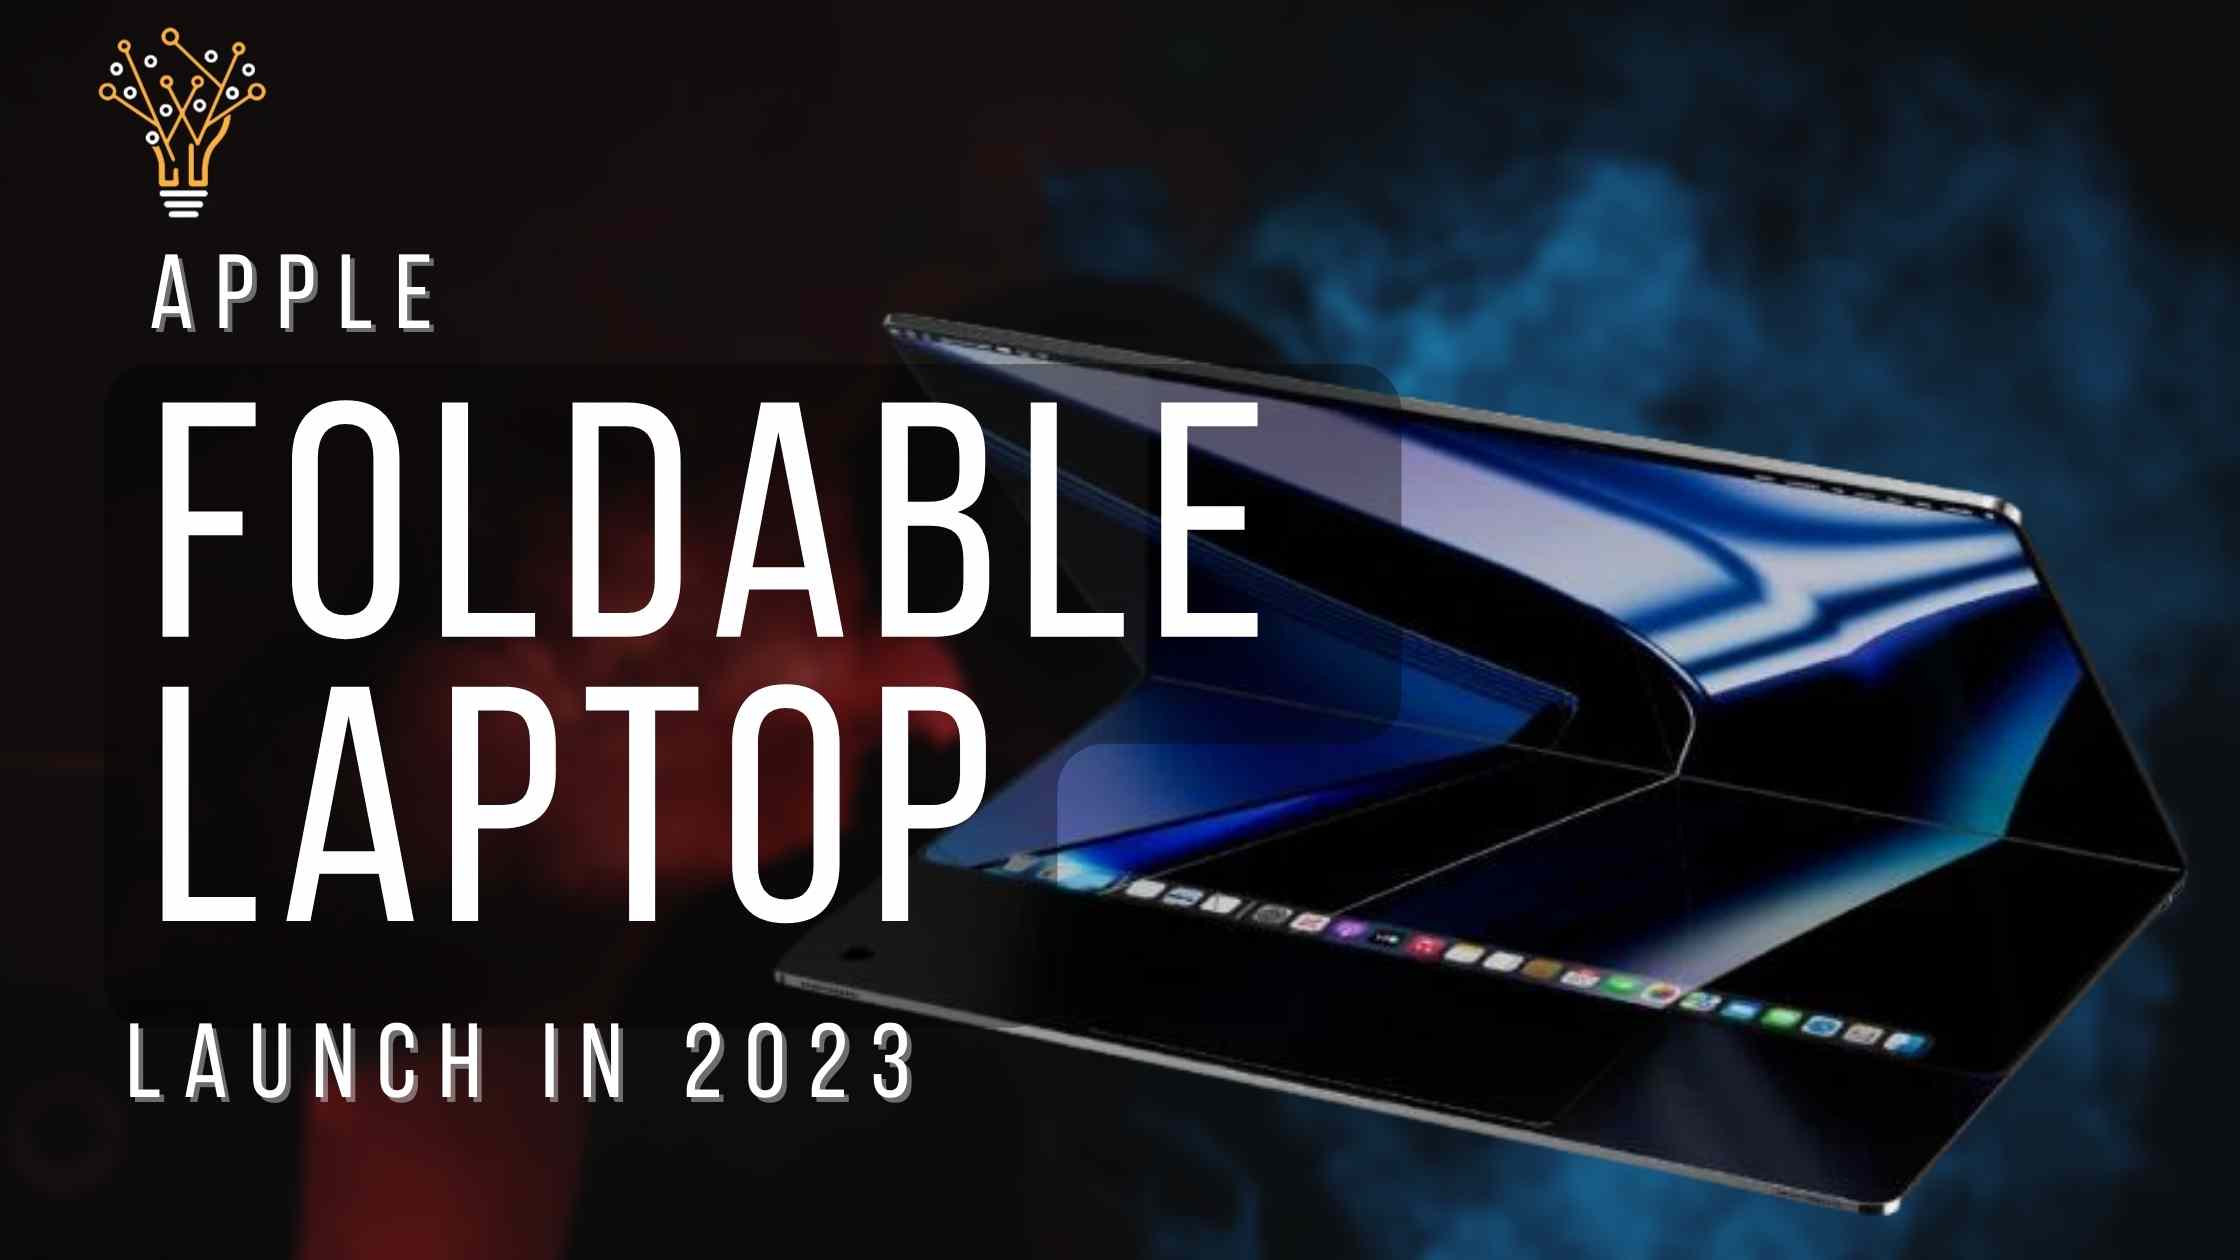 Apple foldable laptop could shake up the laptop market!